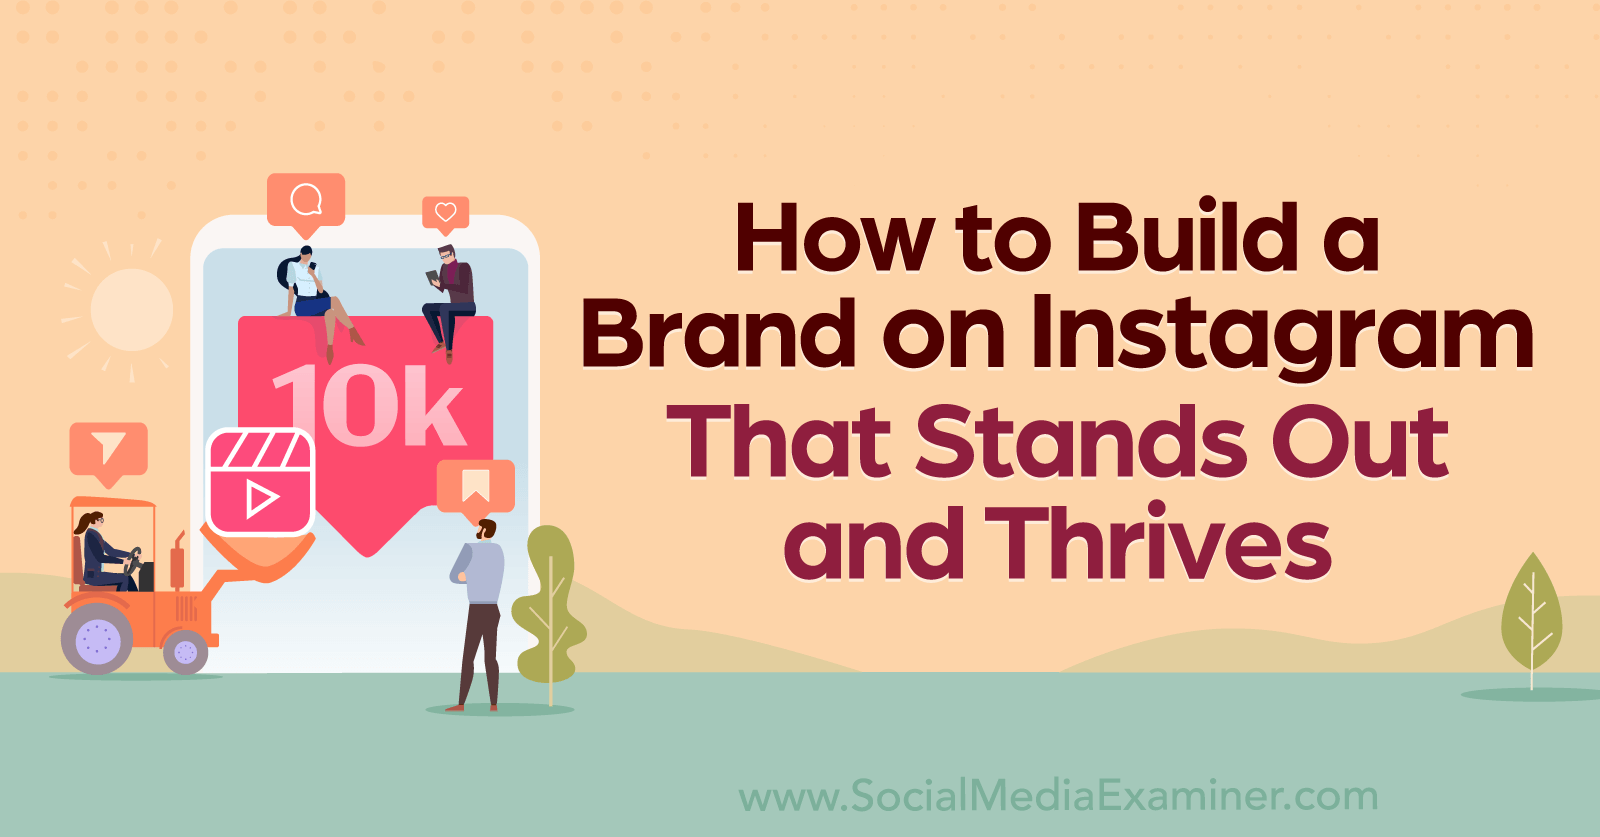 How to Build a Brand on Instagram That Stands Out and Thrives-Social Media Examiner